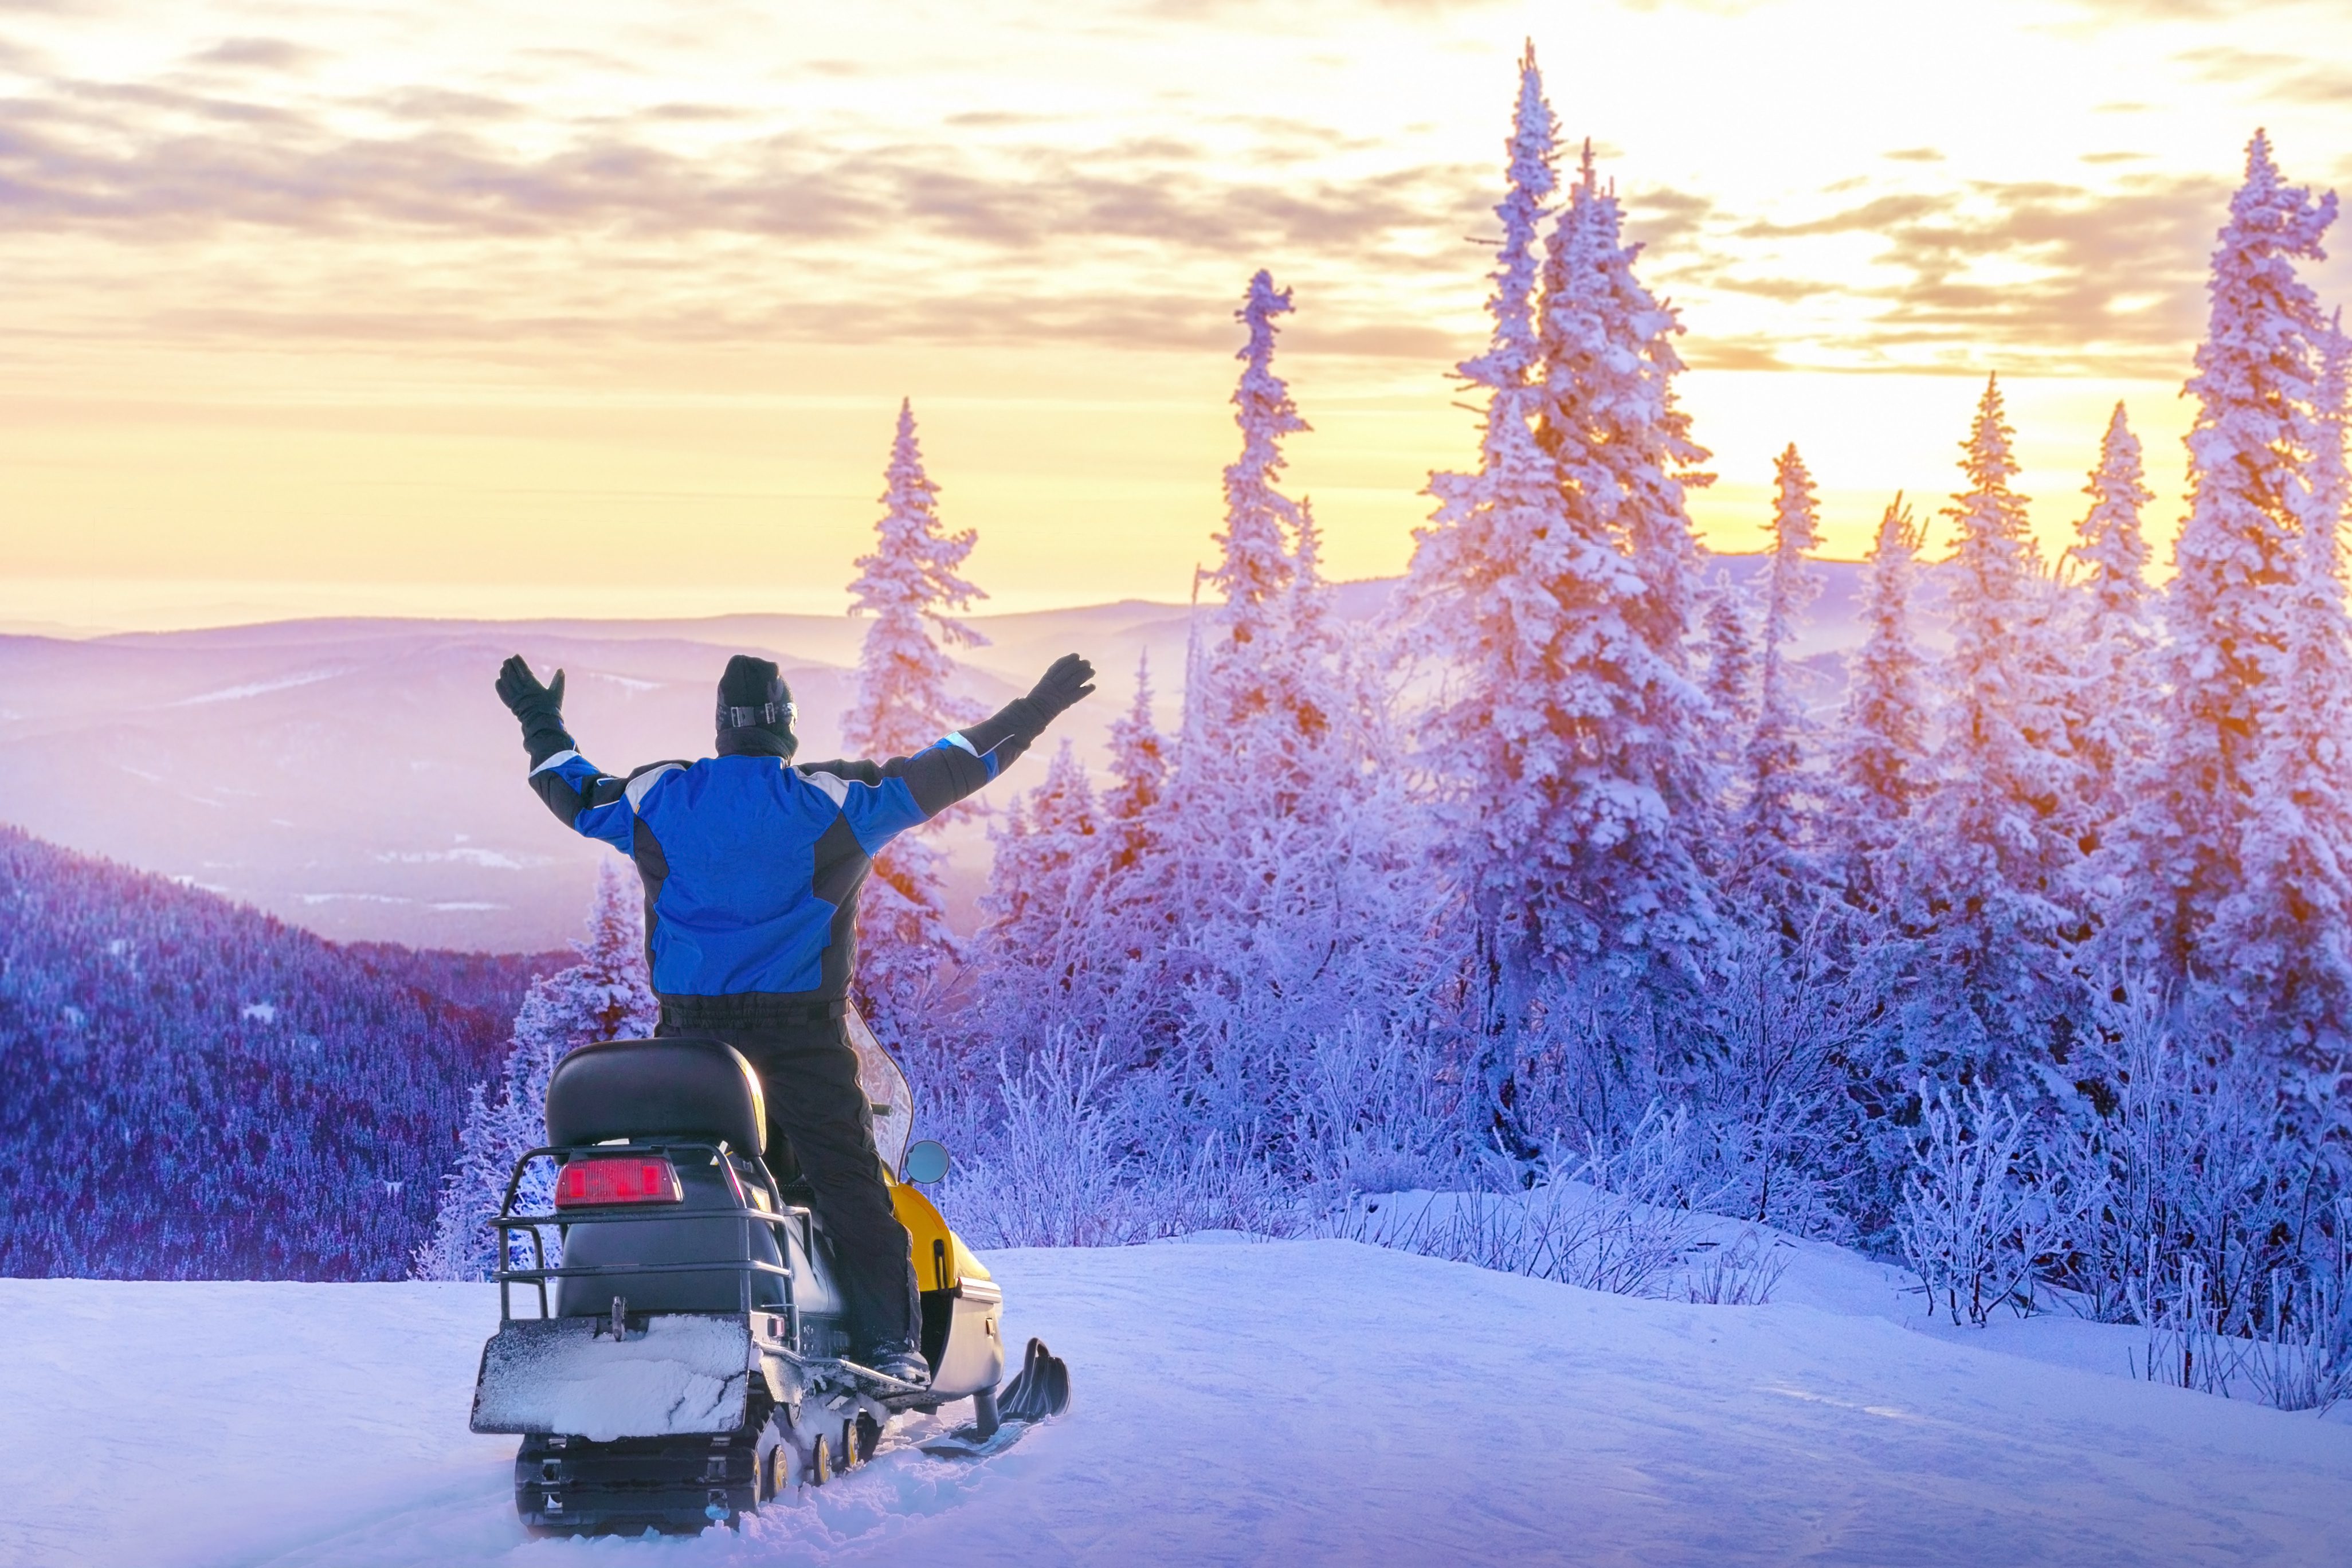 snowmobile safety tips